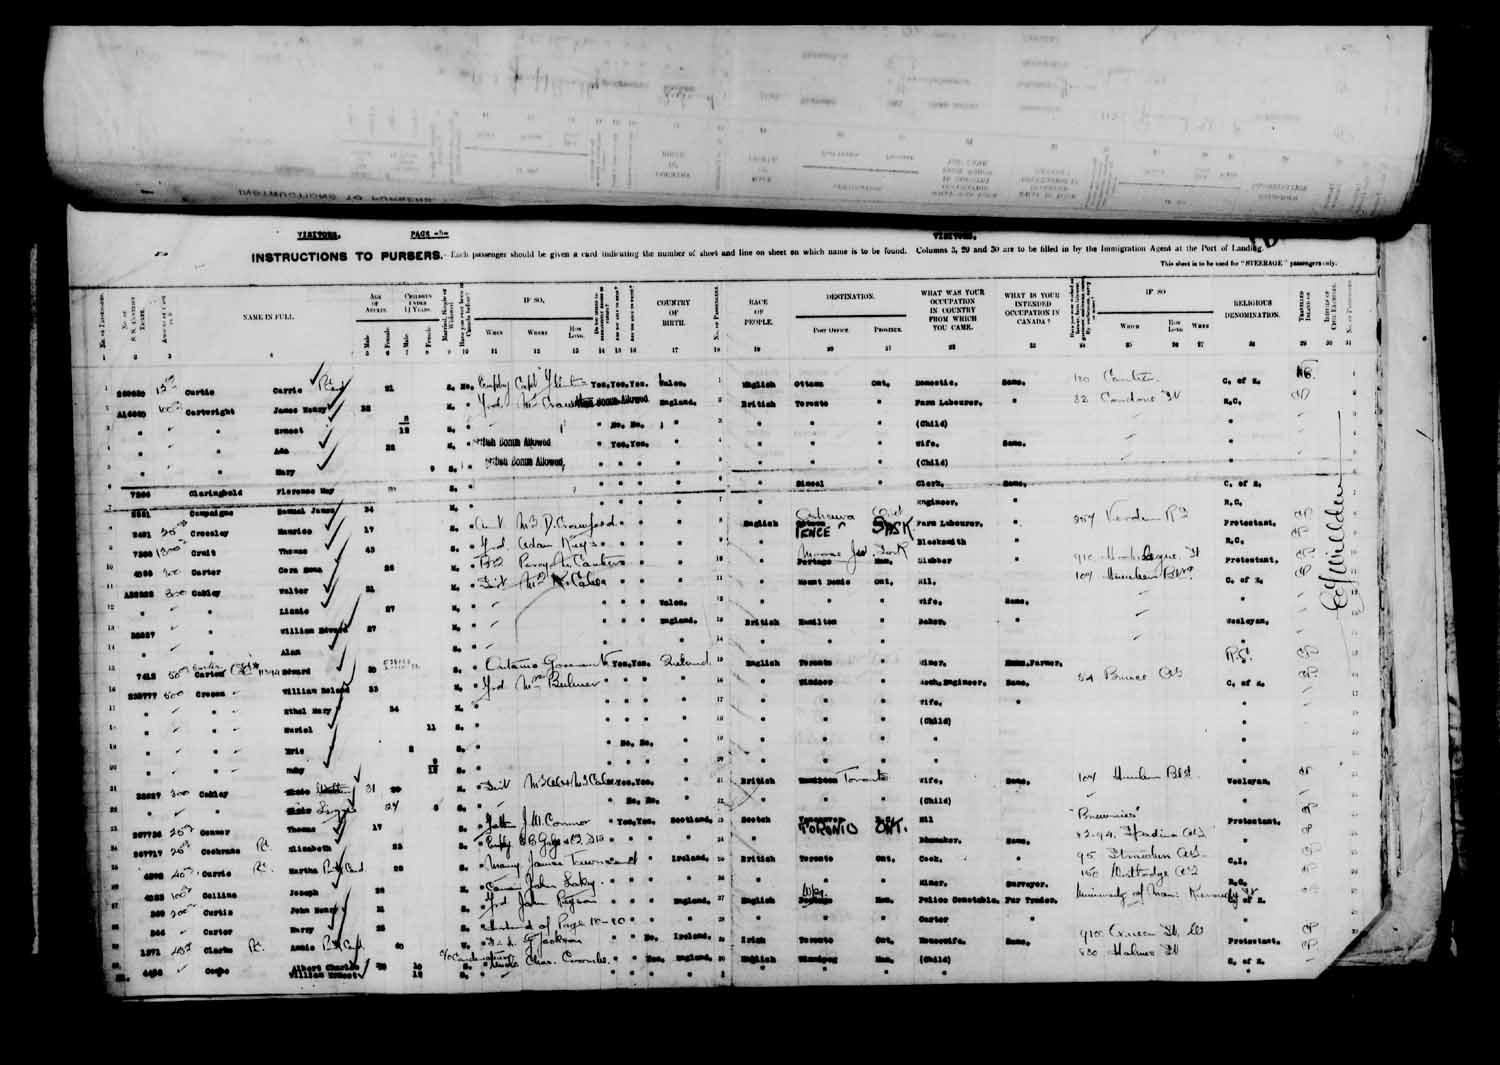 Digitized page of Passenger Lists for Image No.: e003610645